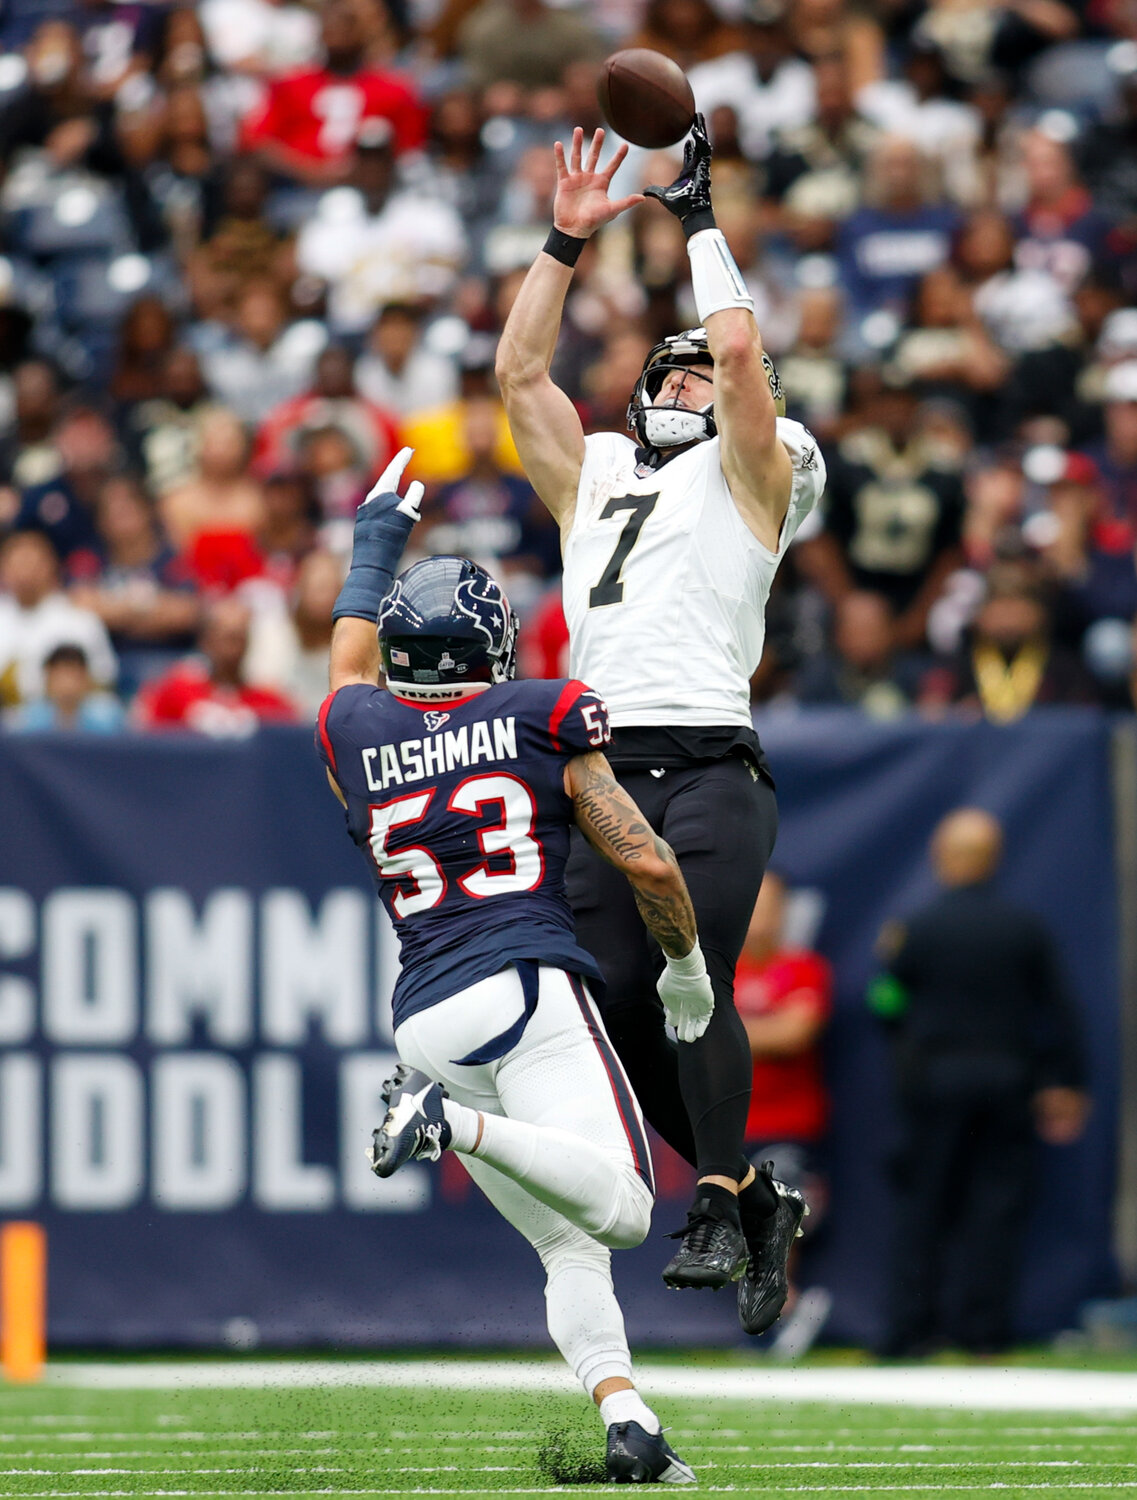 Saints quarterback Taysom Hill (7) elevates but can’t bring in a pass from quarterback Derek Carr during an NFL game between the Texans and the Saints on October 15, 2023 in Houston. The Texans won, 20-13.